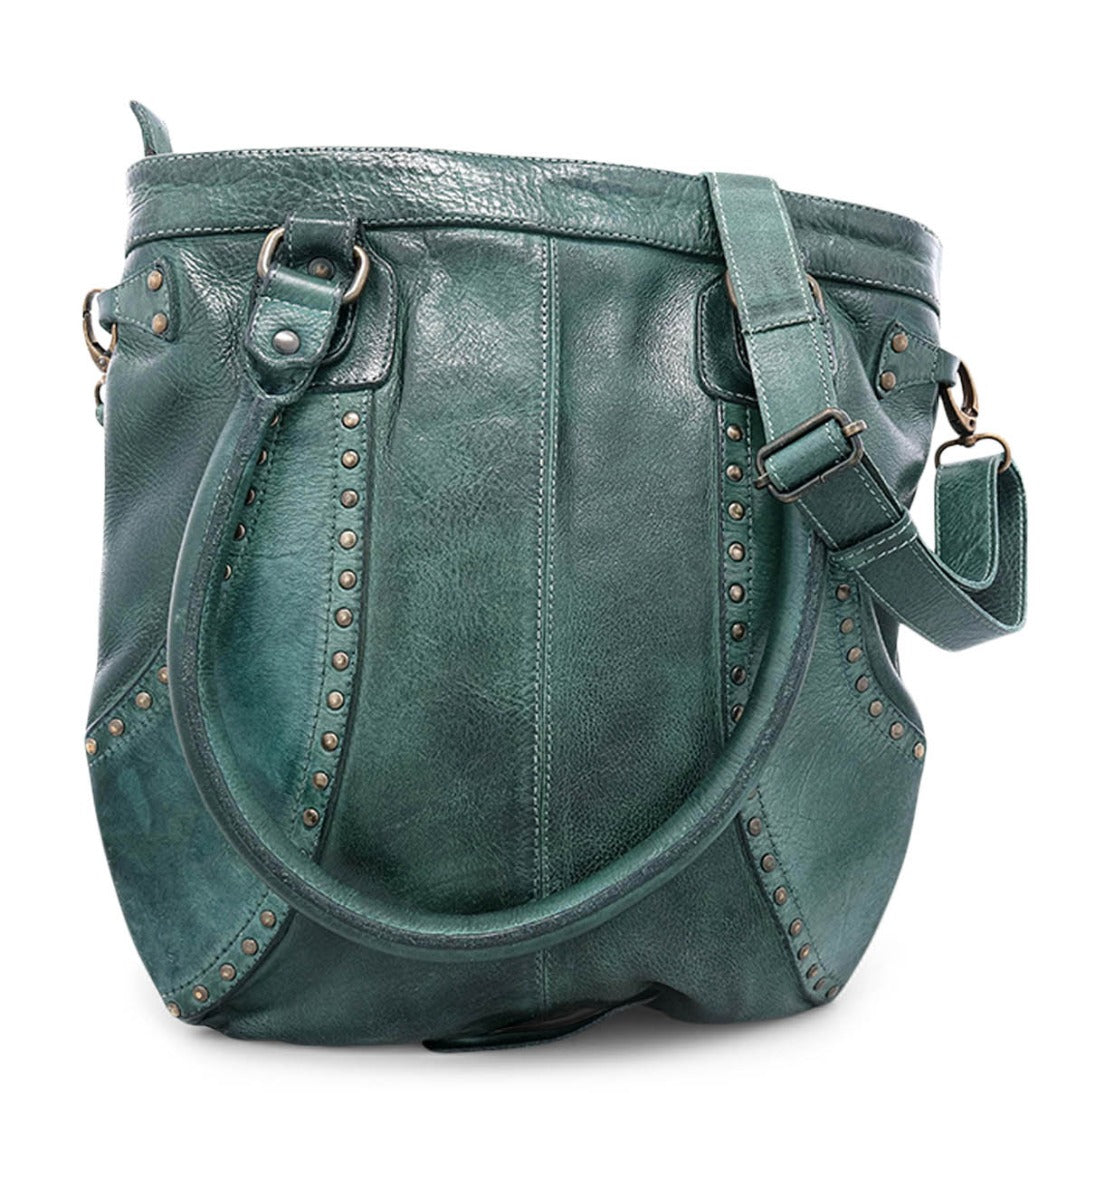 A green Gala bag with studding and handles by Bed Stu.